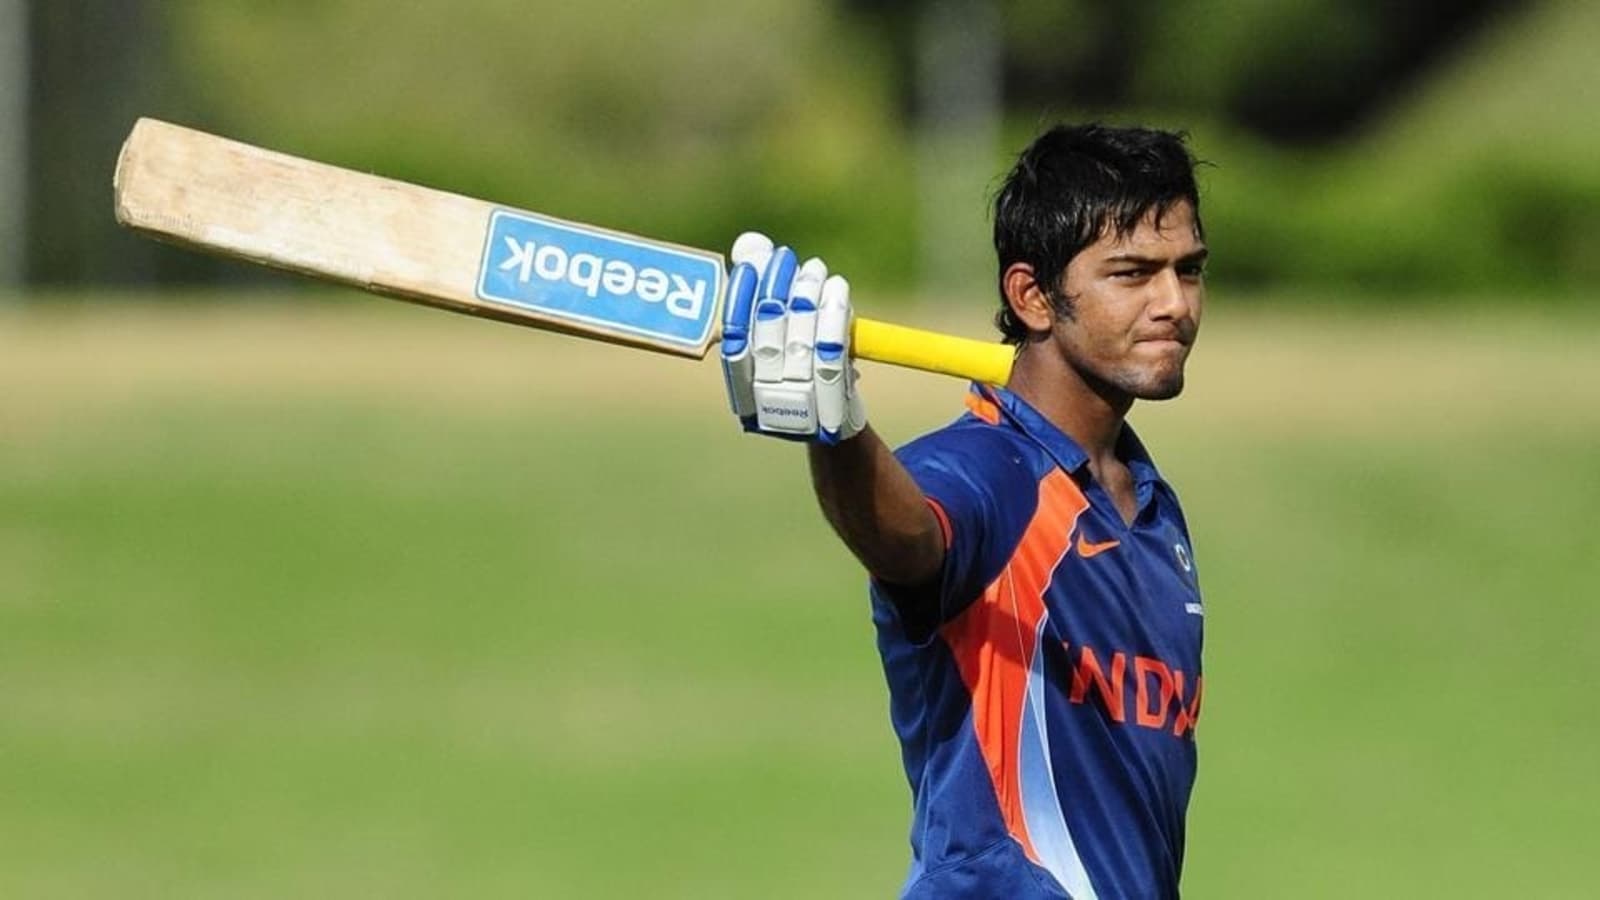 “Very Happy With The Decision To Move, Want To Play For USA” – Unmukt Chand